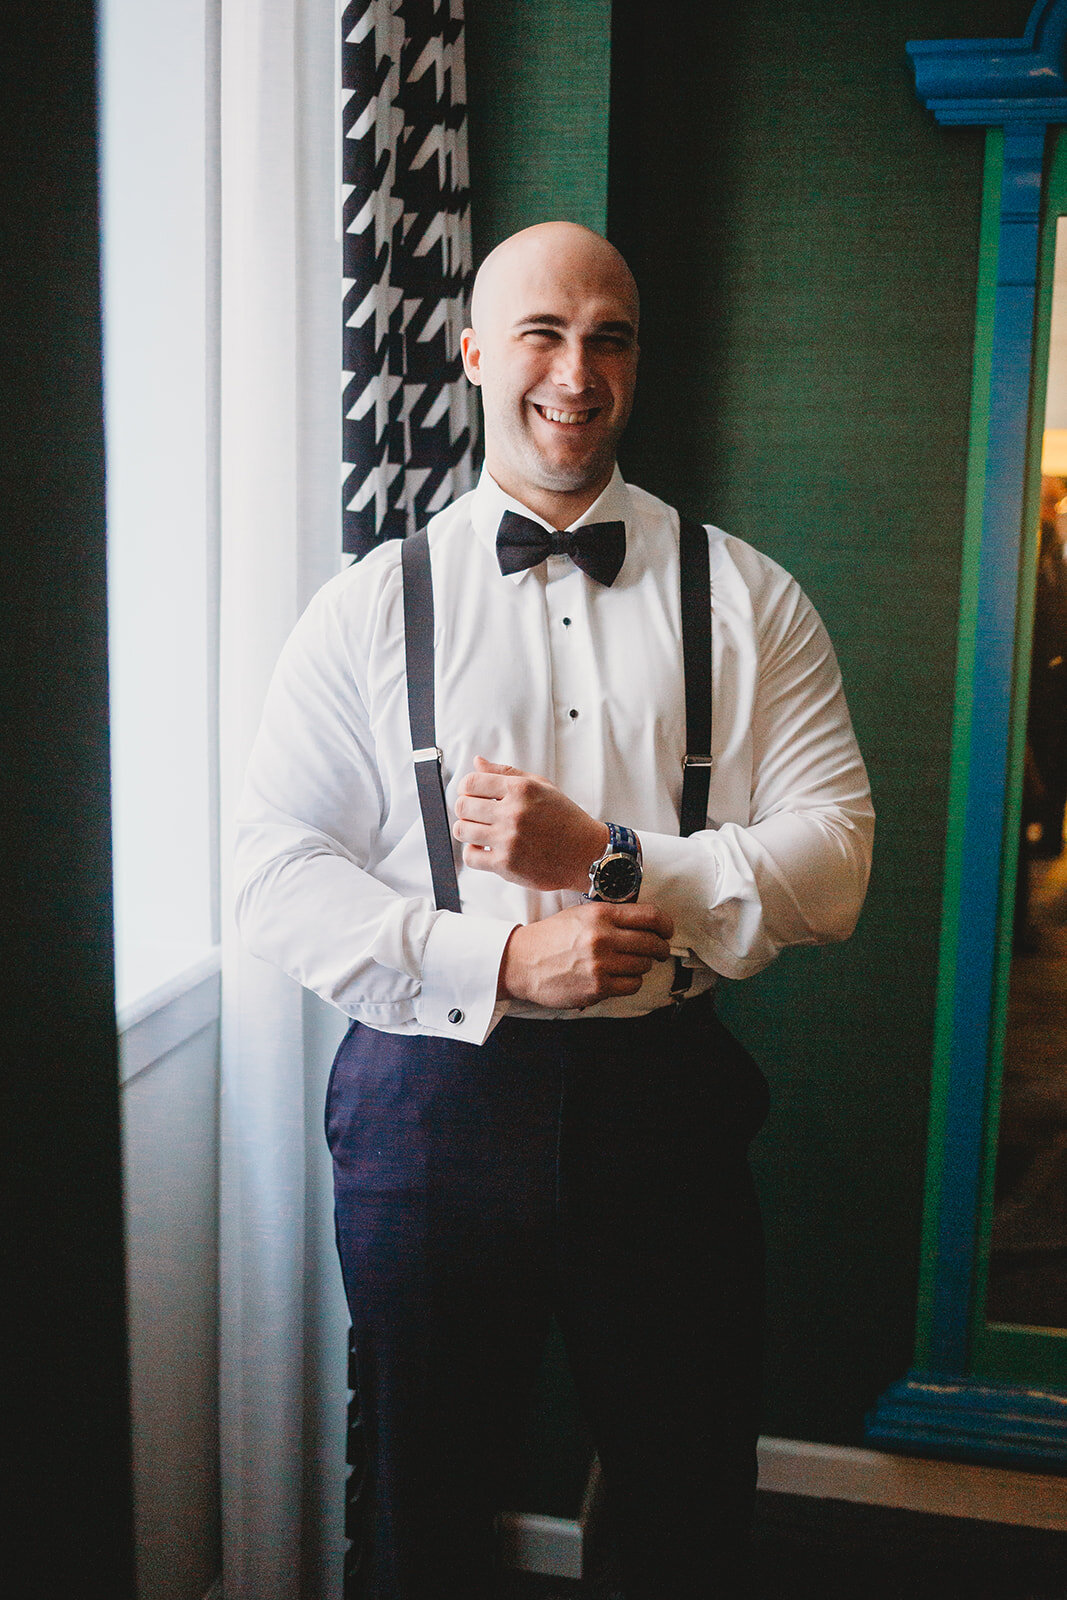 Emily and Kyle's Luxe Burgundy and Sapphire Fall Wedding at LeMont Restaurant 